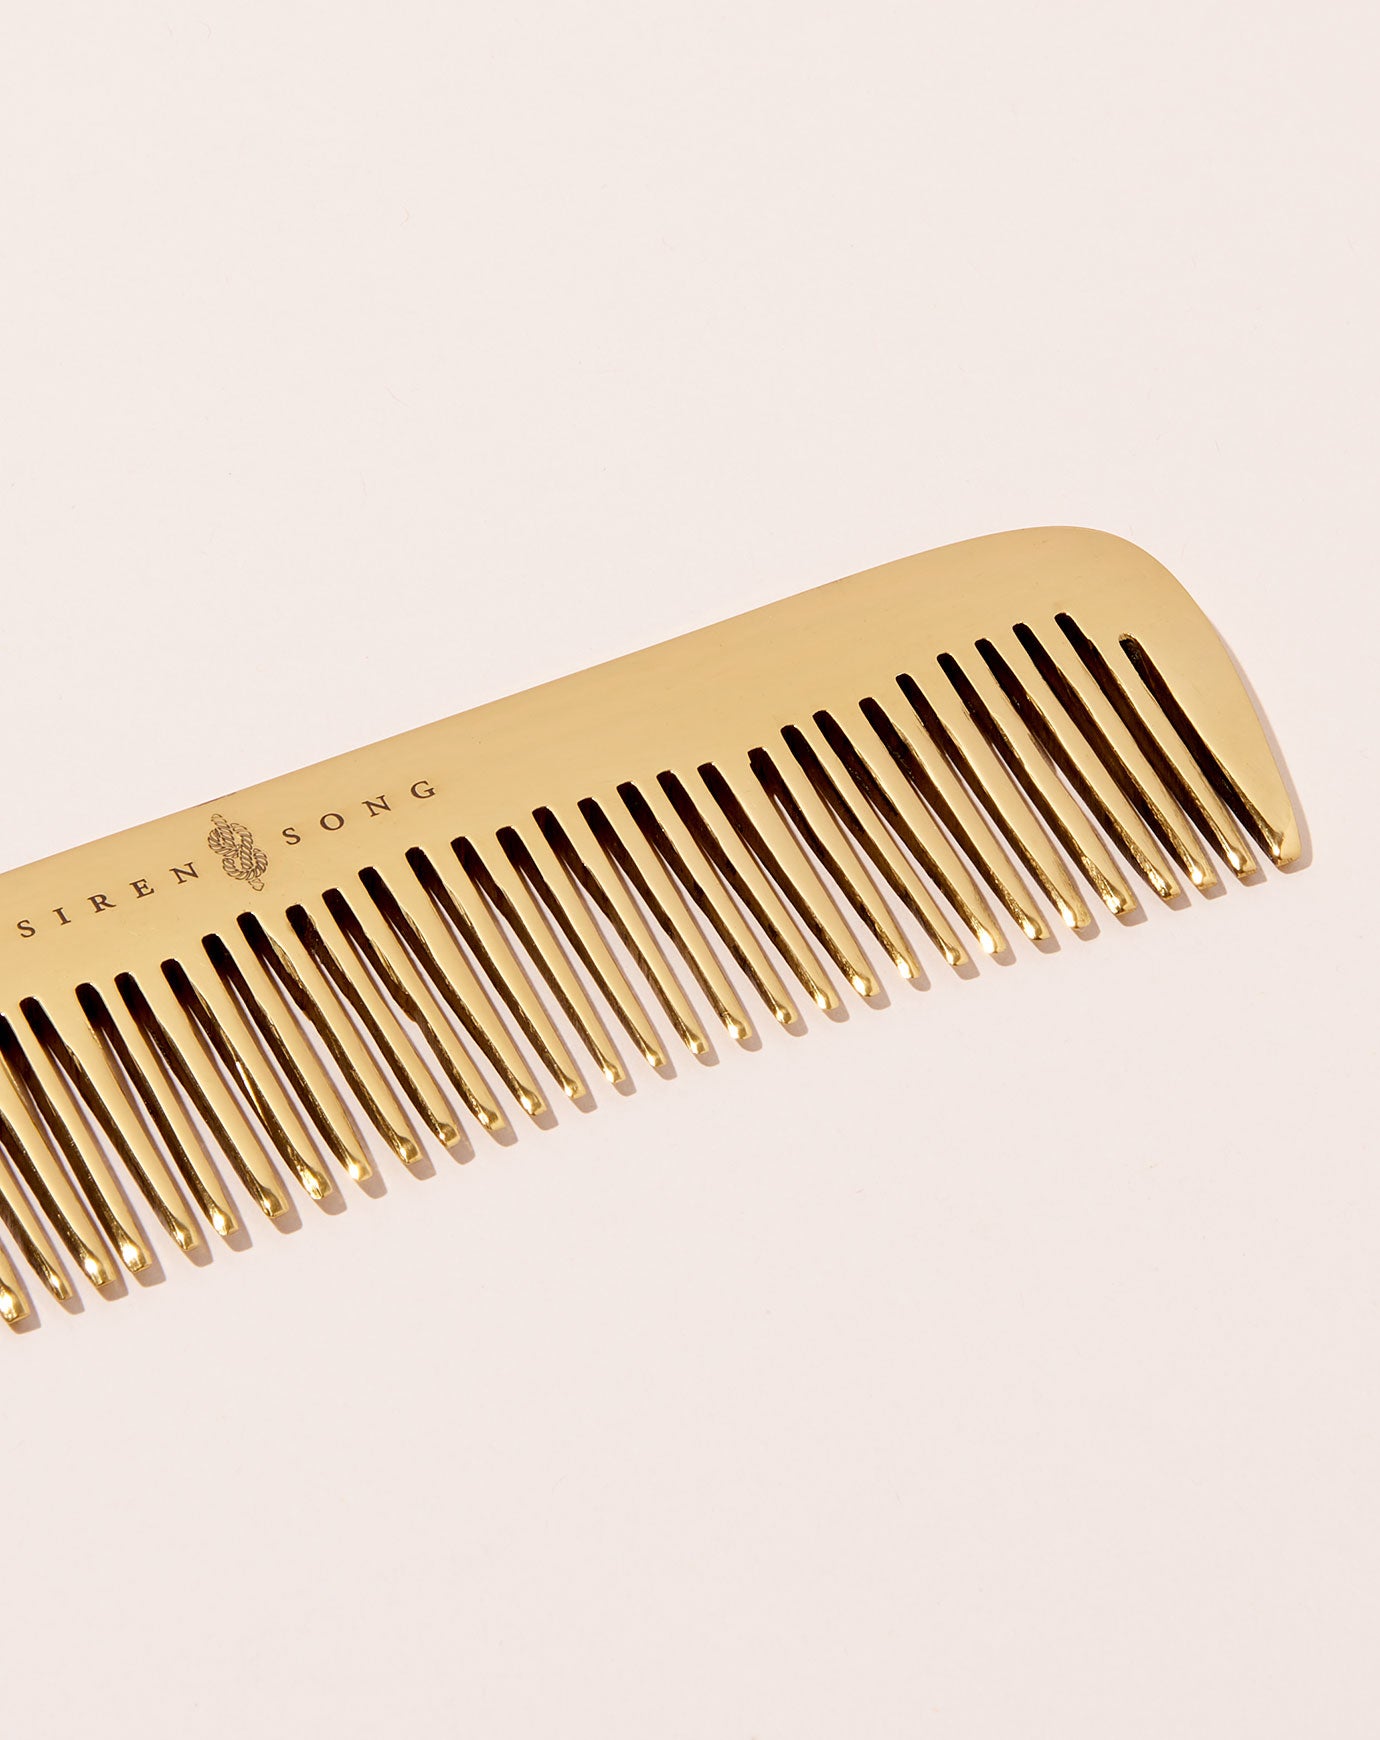 Siren Song Large Brass Comb